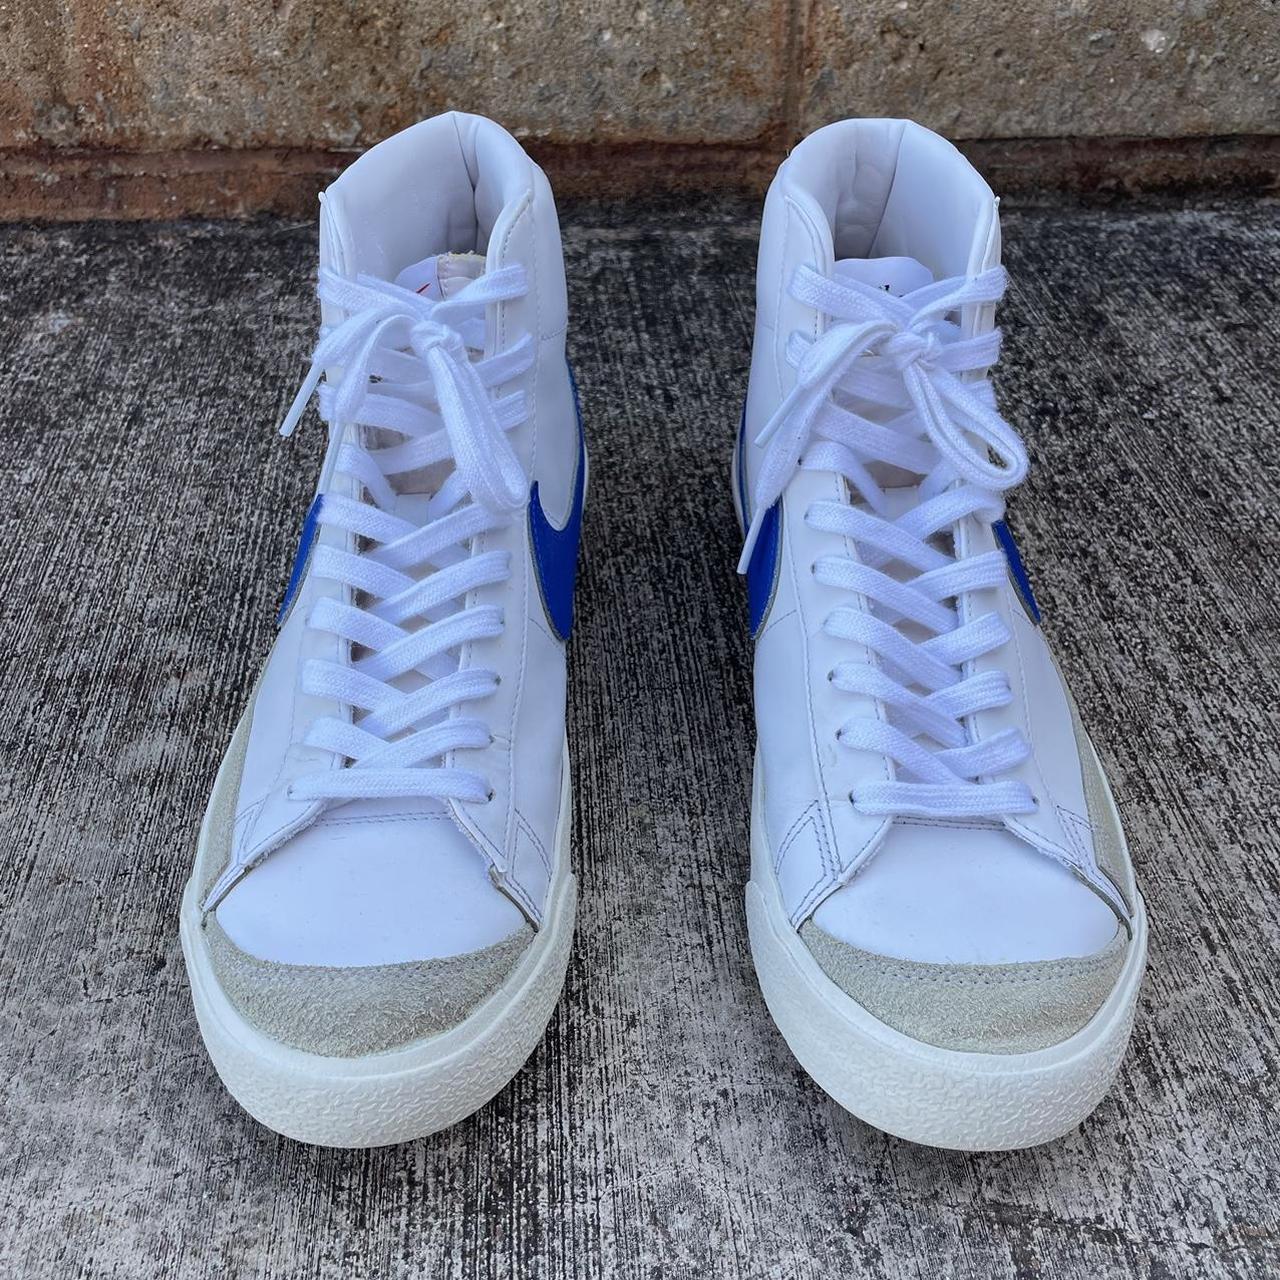 Nike Men's White and Blue Trainers (3)